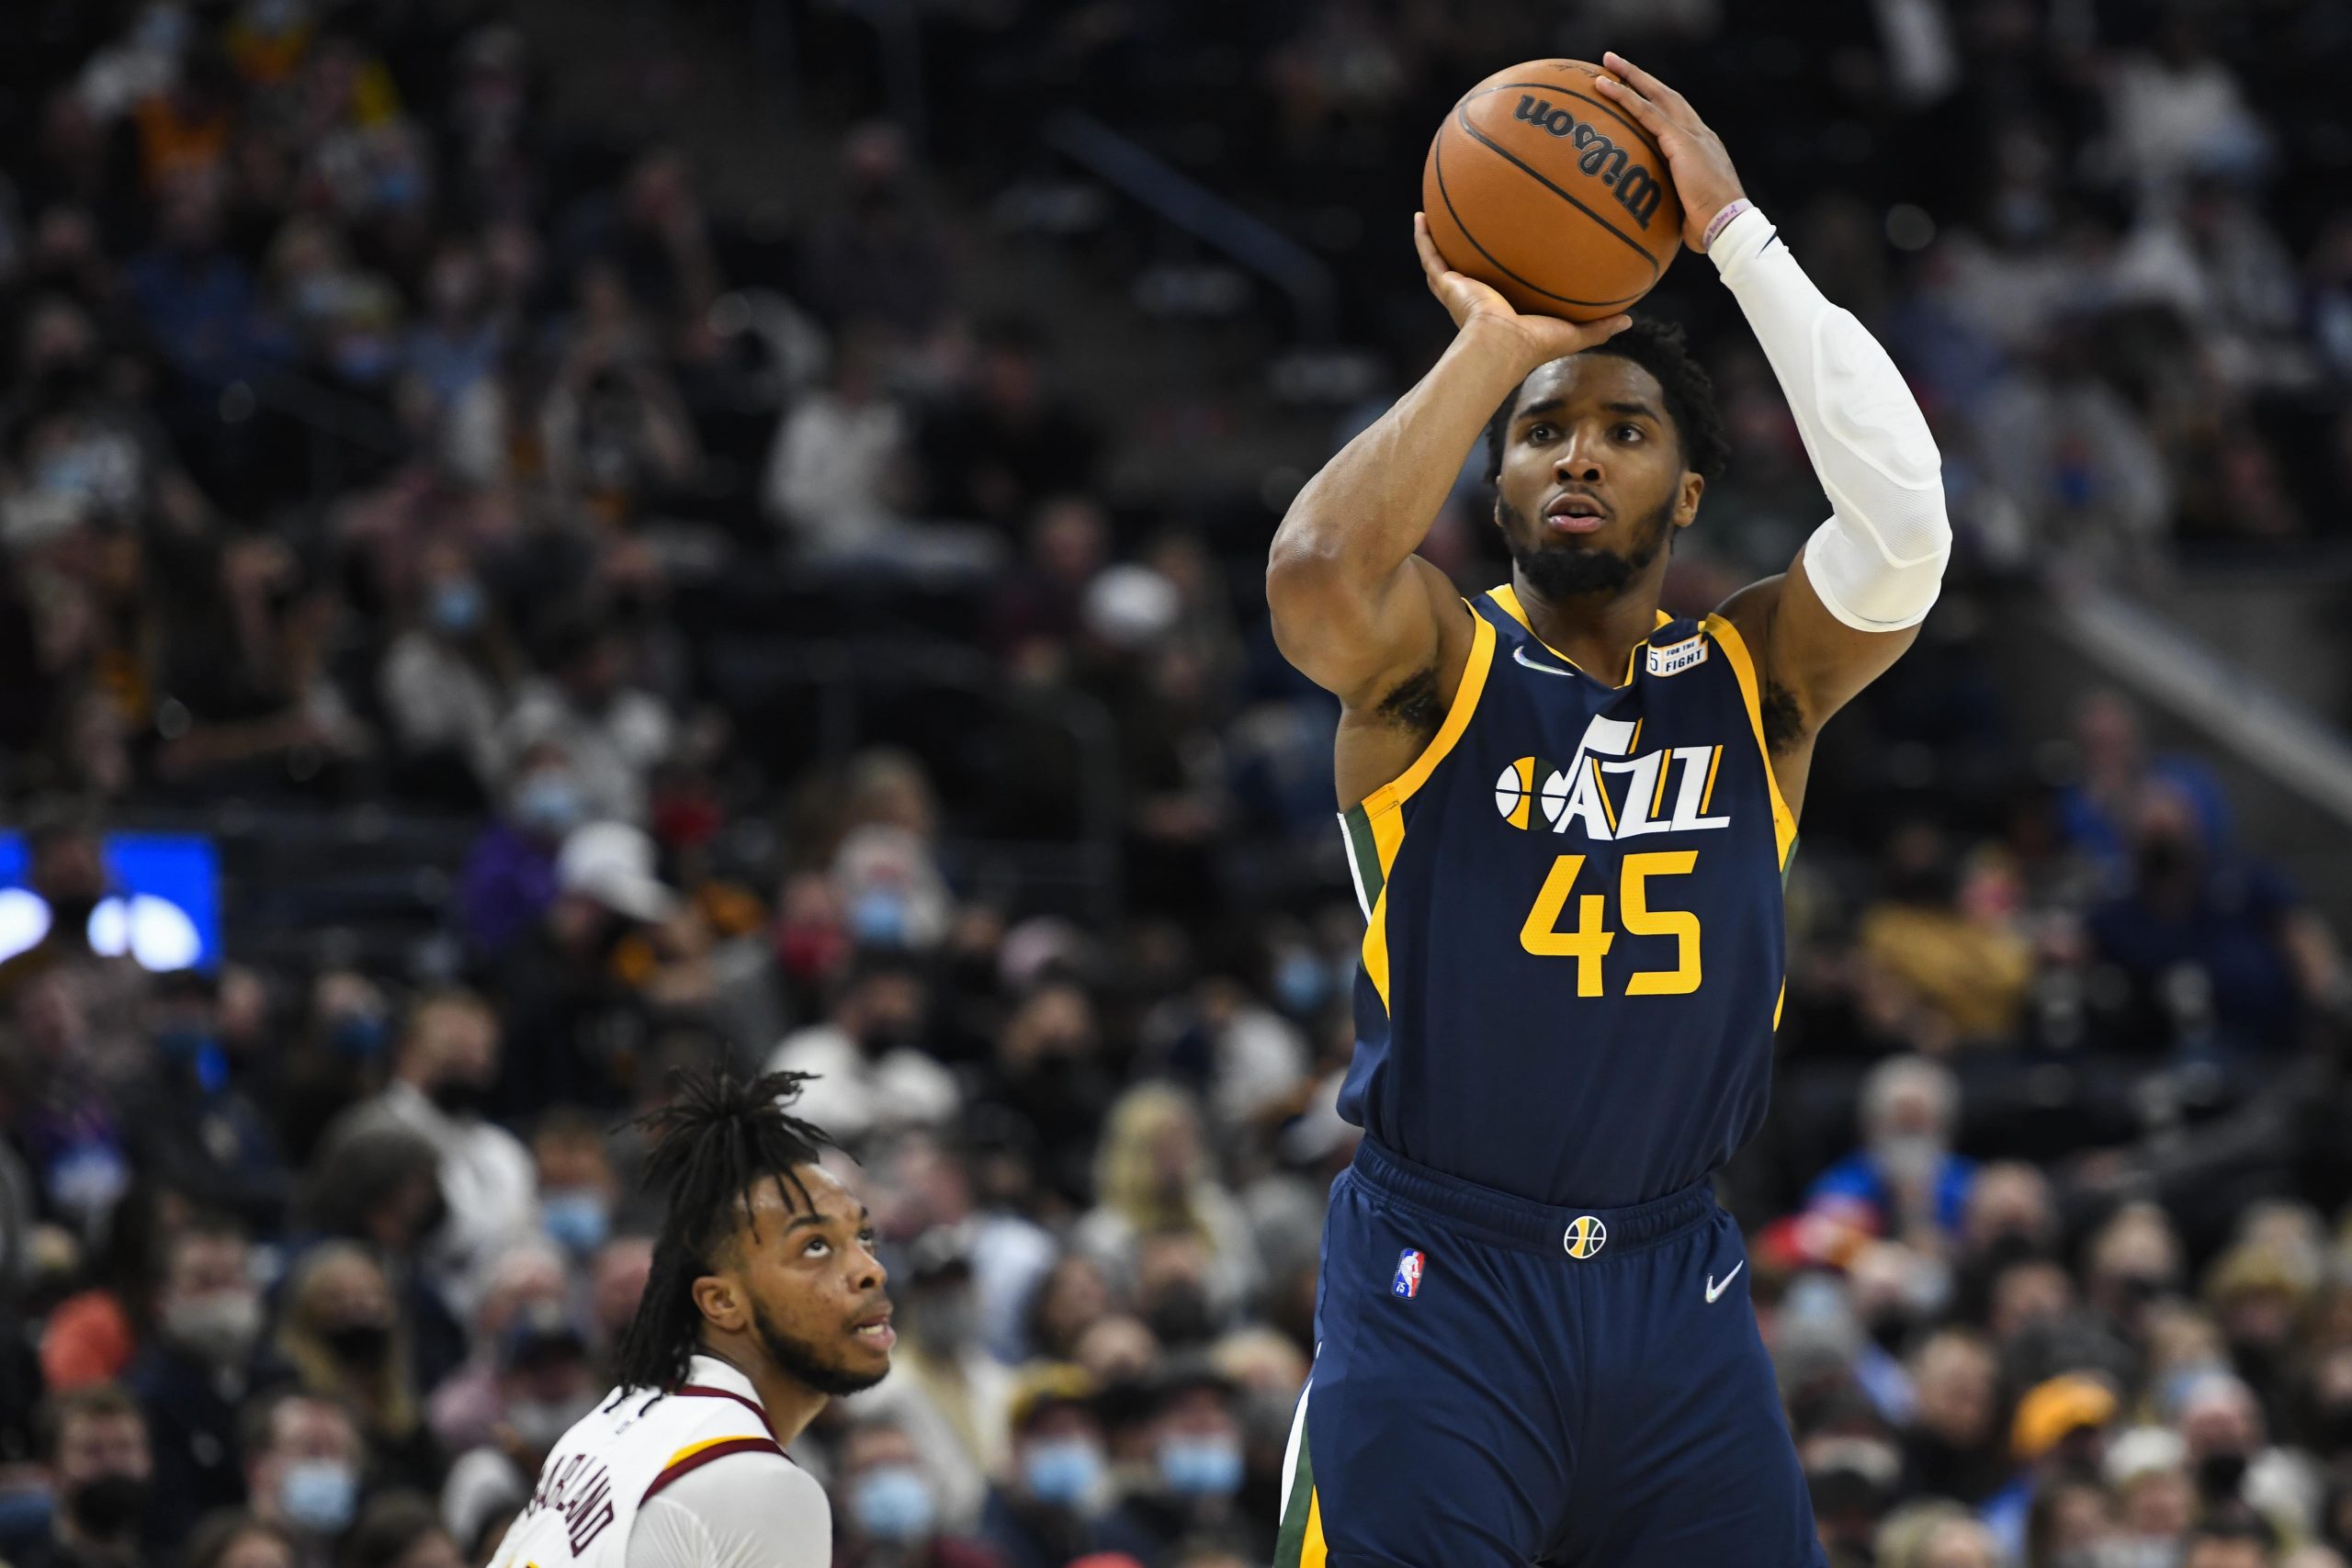 Utah Jazz guard Donovan Mitchell (45) shoots over Cleveland Cavaliers guard Darius Garland, left, during the second half of an NBA basketball game Wednesday, Jan. 12, 2022, in Salt Lake City.